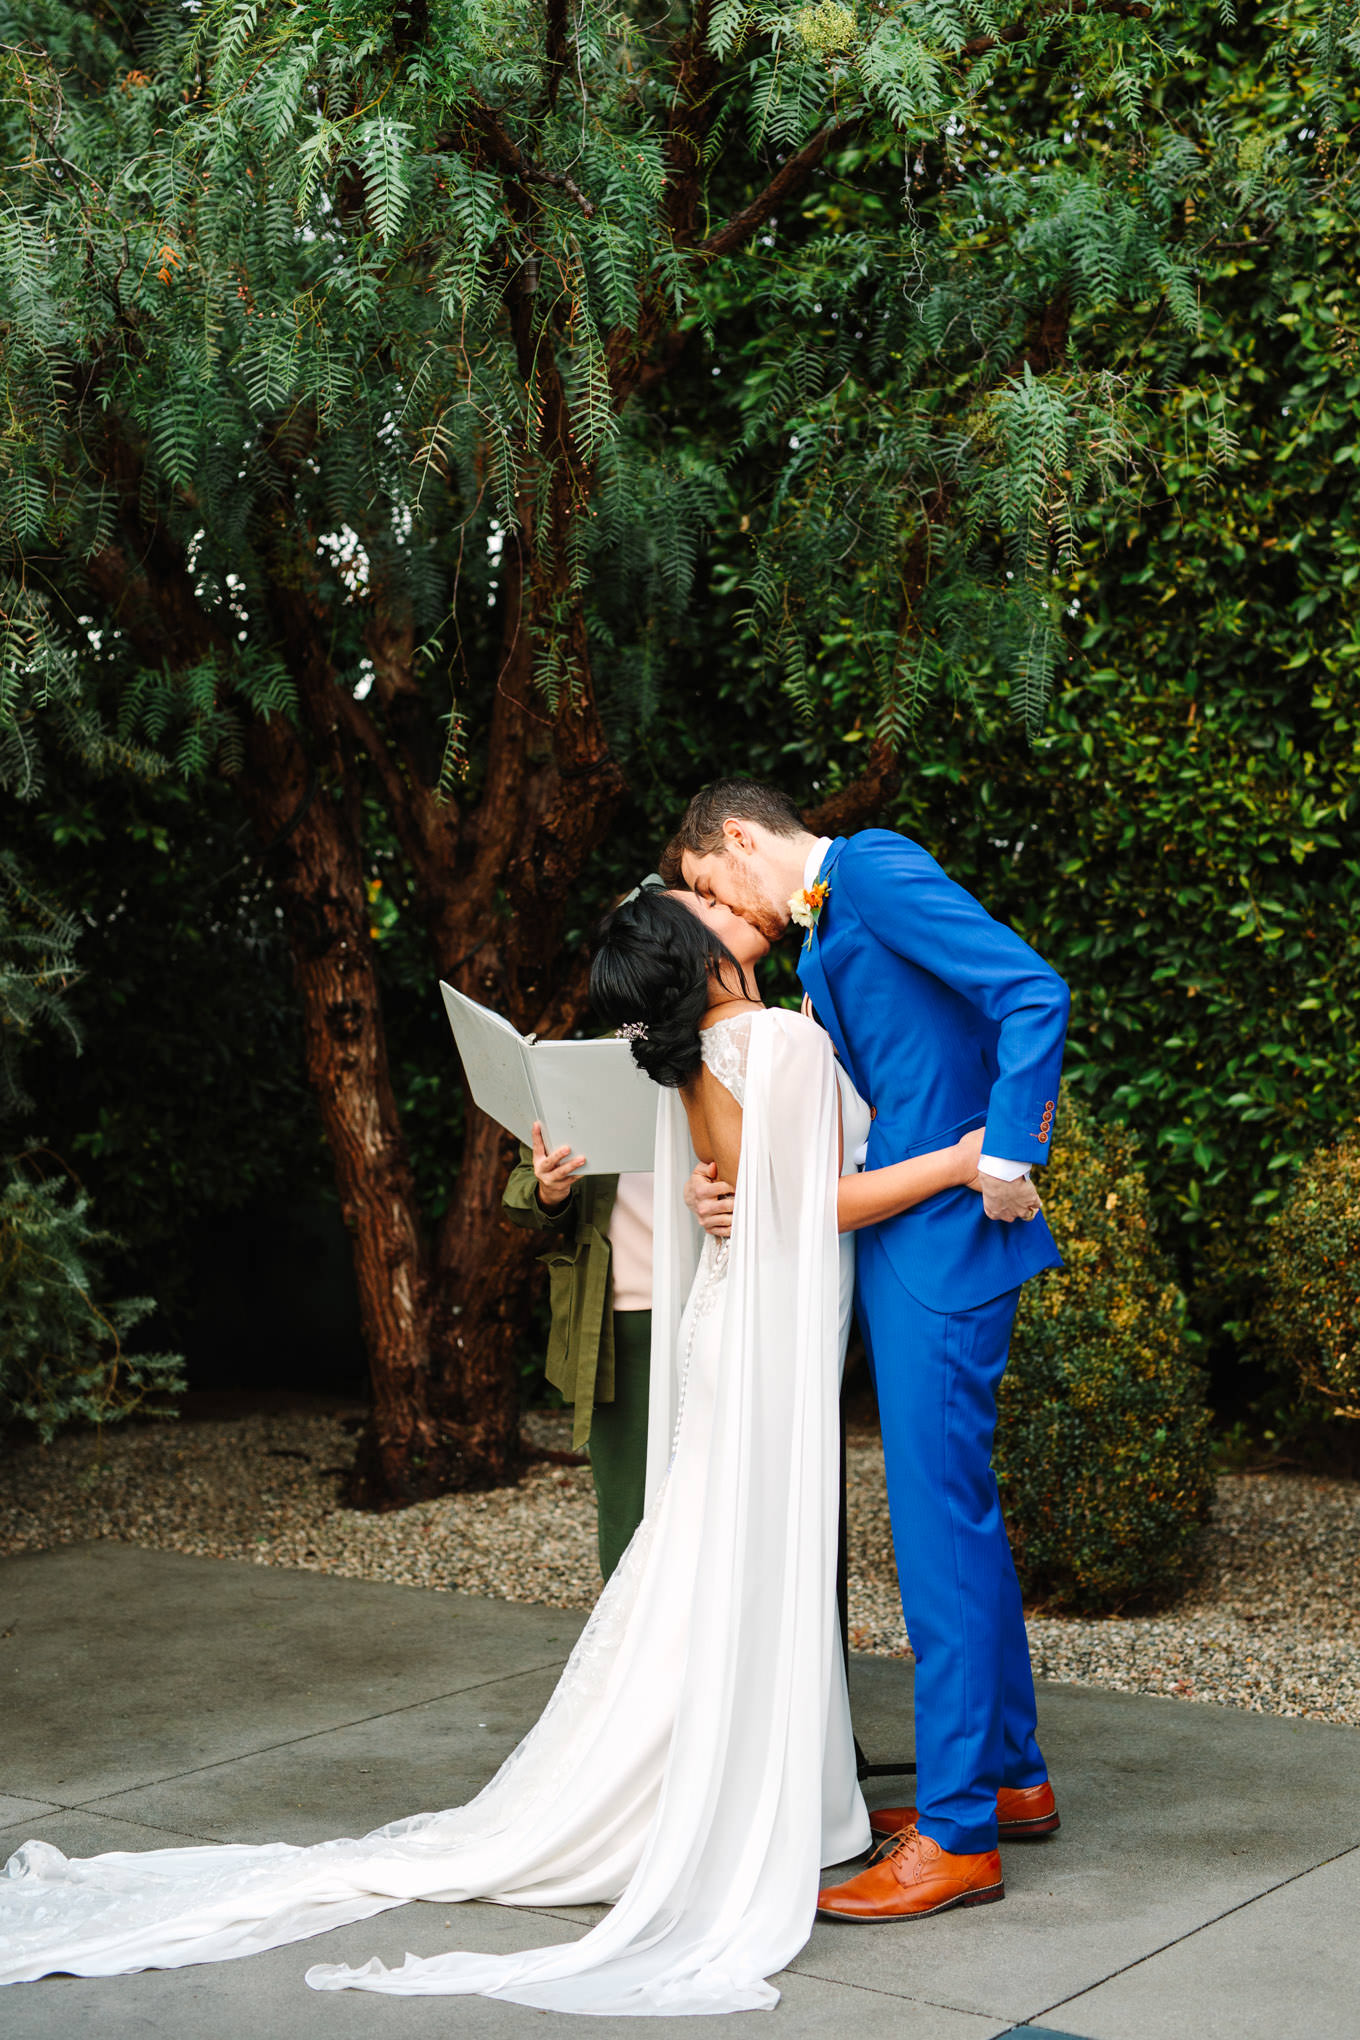 First kiss at wedding | TV inspired wedding at The Fig House Los Angeles | Published on The Knot | Fresh and colorful photography for fun-loving couples in Southern California | #losangeleswedding #TVwedding #colorfulwedding #theknot   Source: Mary Costa Photography | Los Angeles wedding photographer